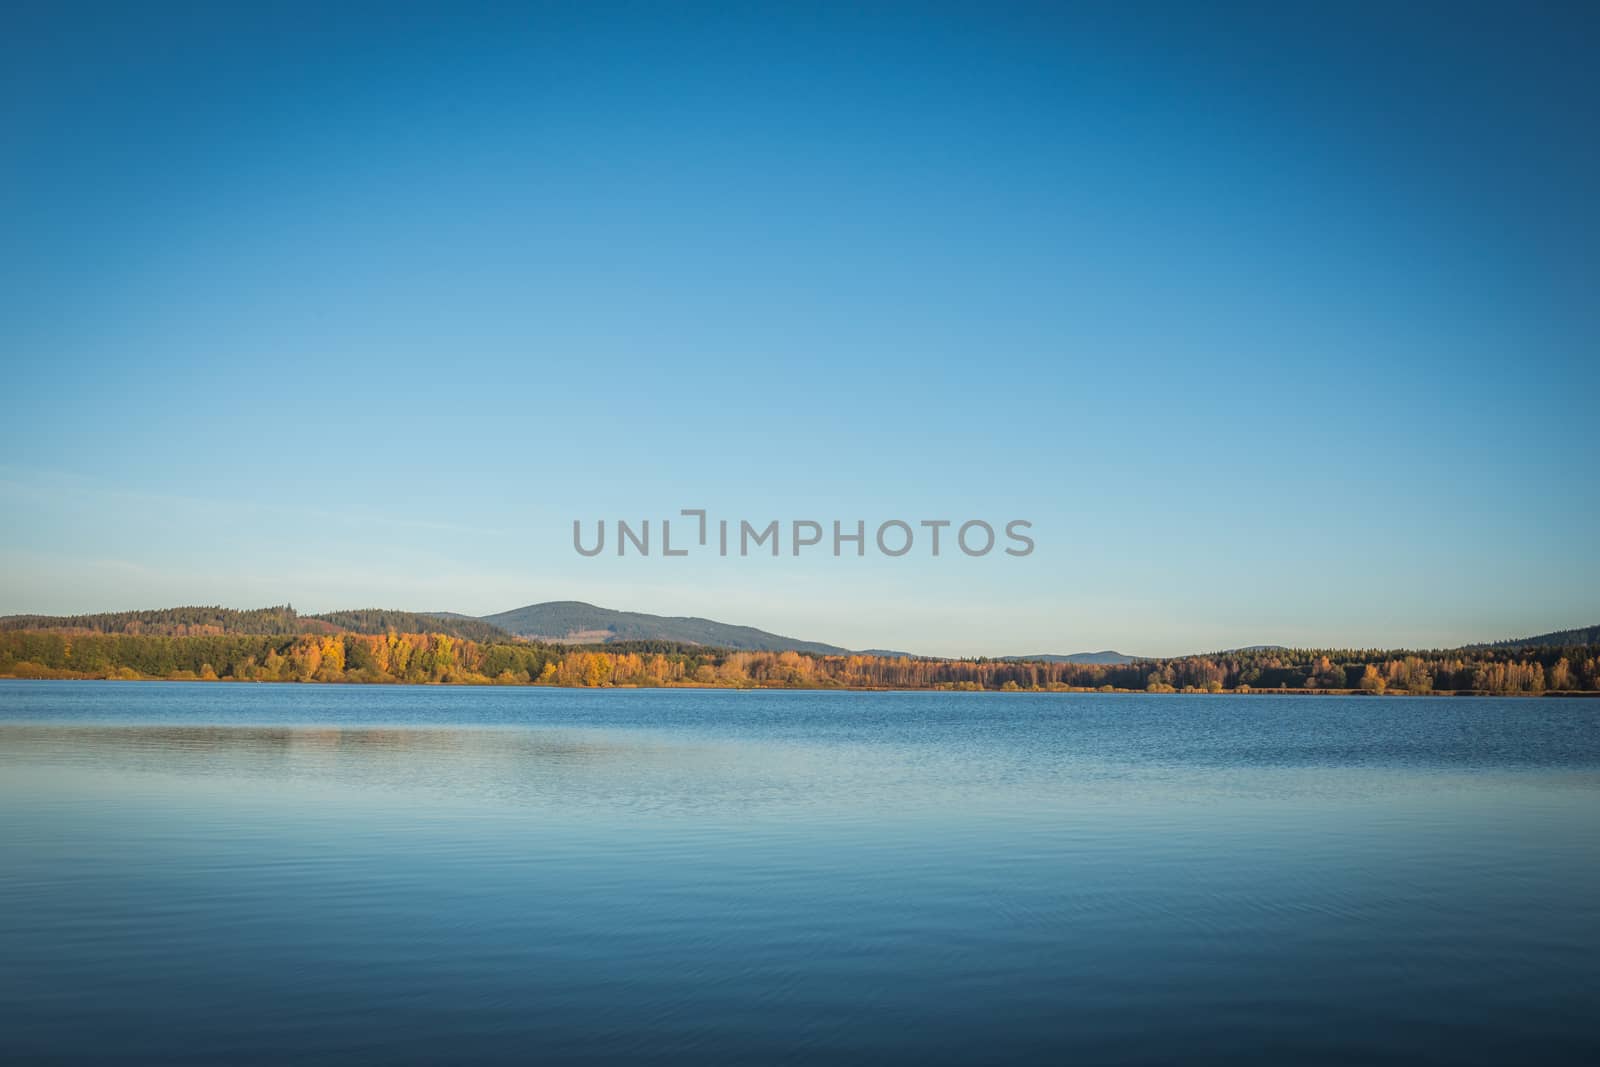 The Lipno Dam in a bright summer day. The lake is calm, has clean blue water. There are no clouds in the sky.